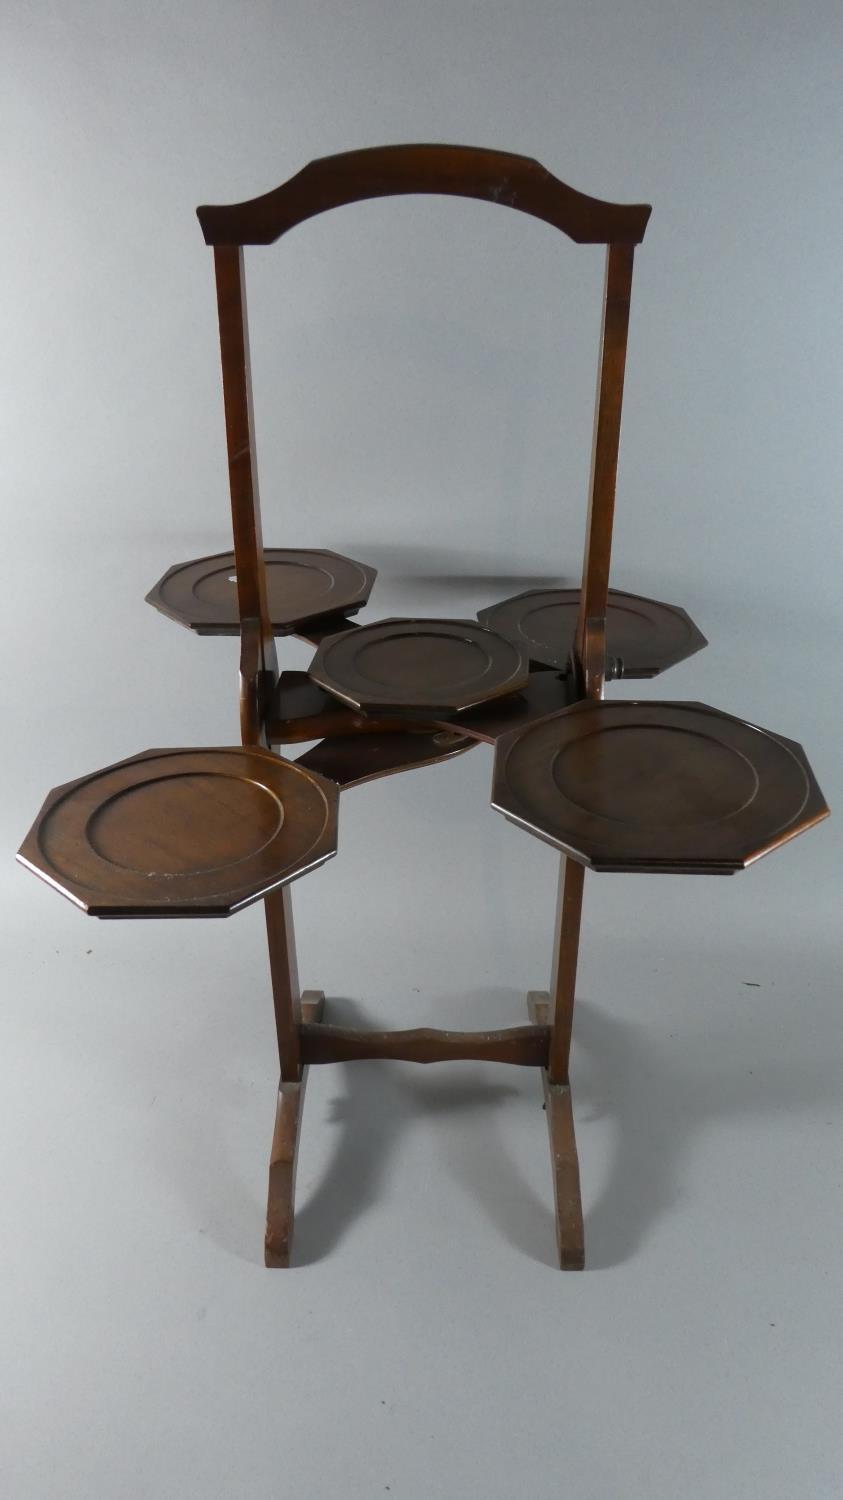 An Early 20th Century Mahogany "Monoplane" Folding Five Section Cake Stand, 77cm High - Image 2 of 3